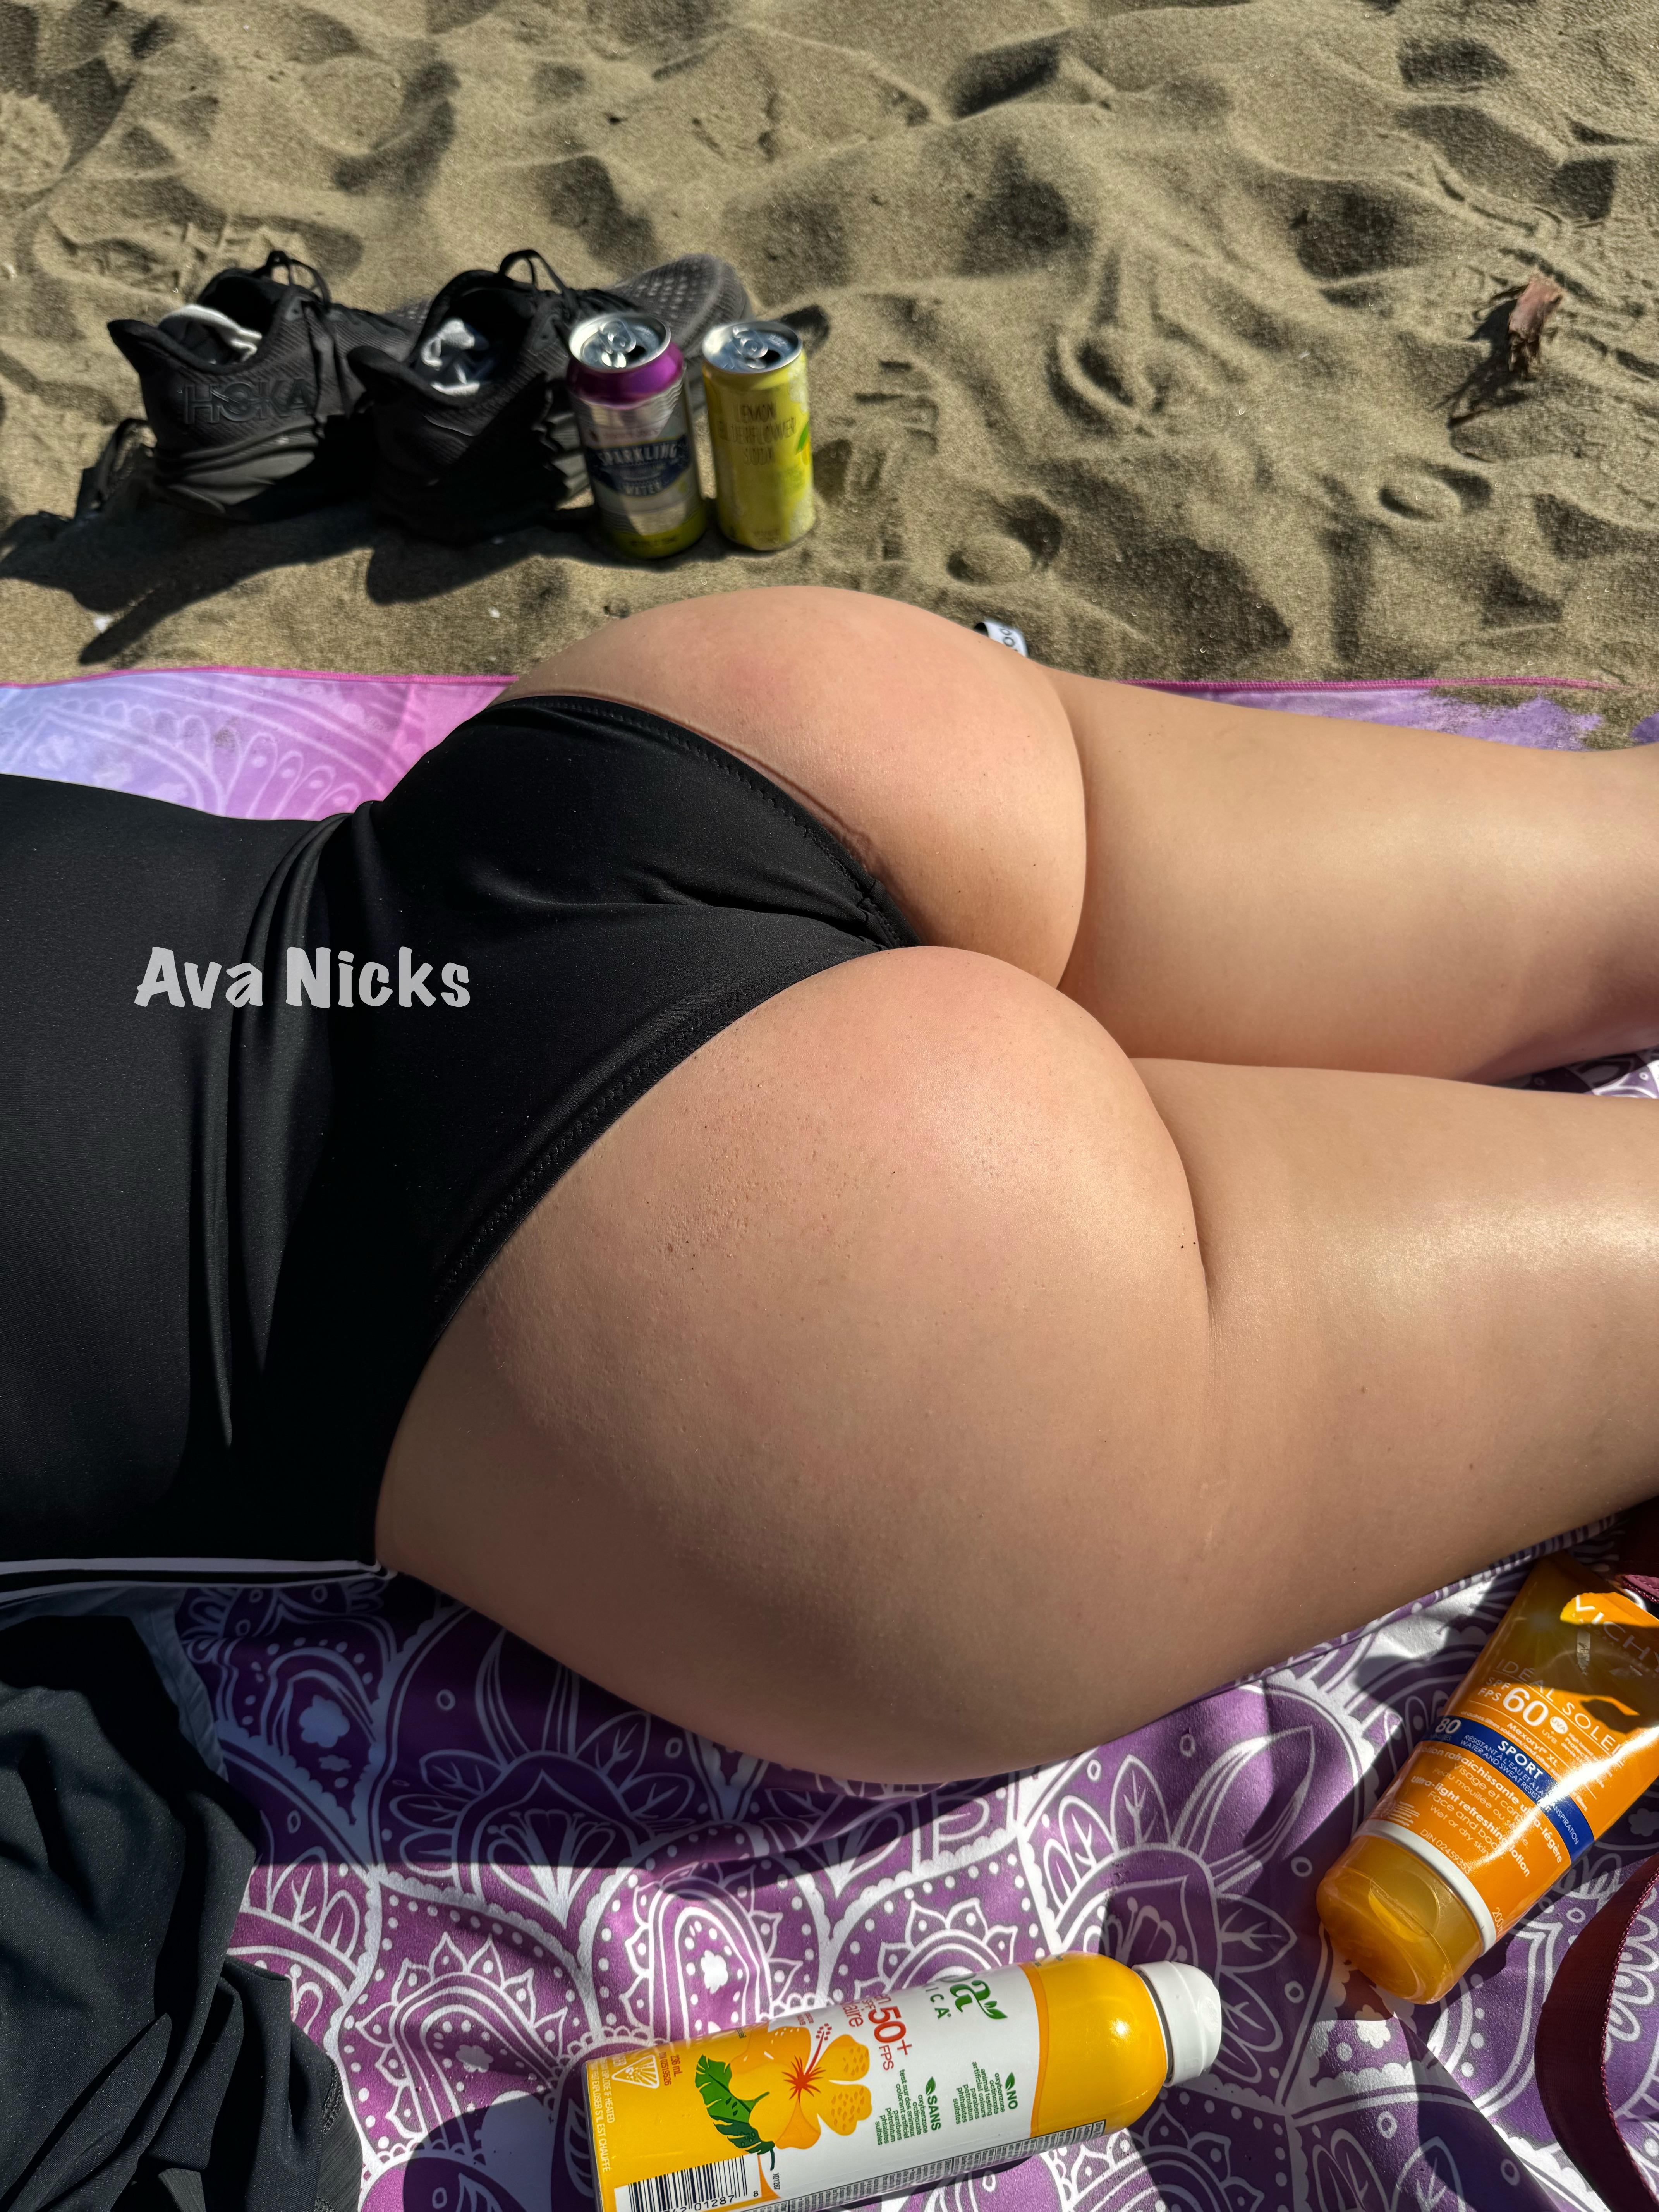 PAWG Would I catch you sneaking a peek of these